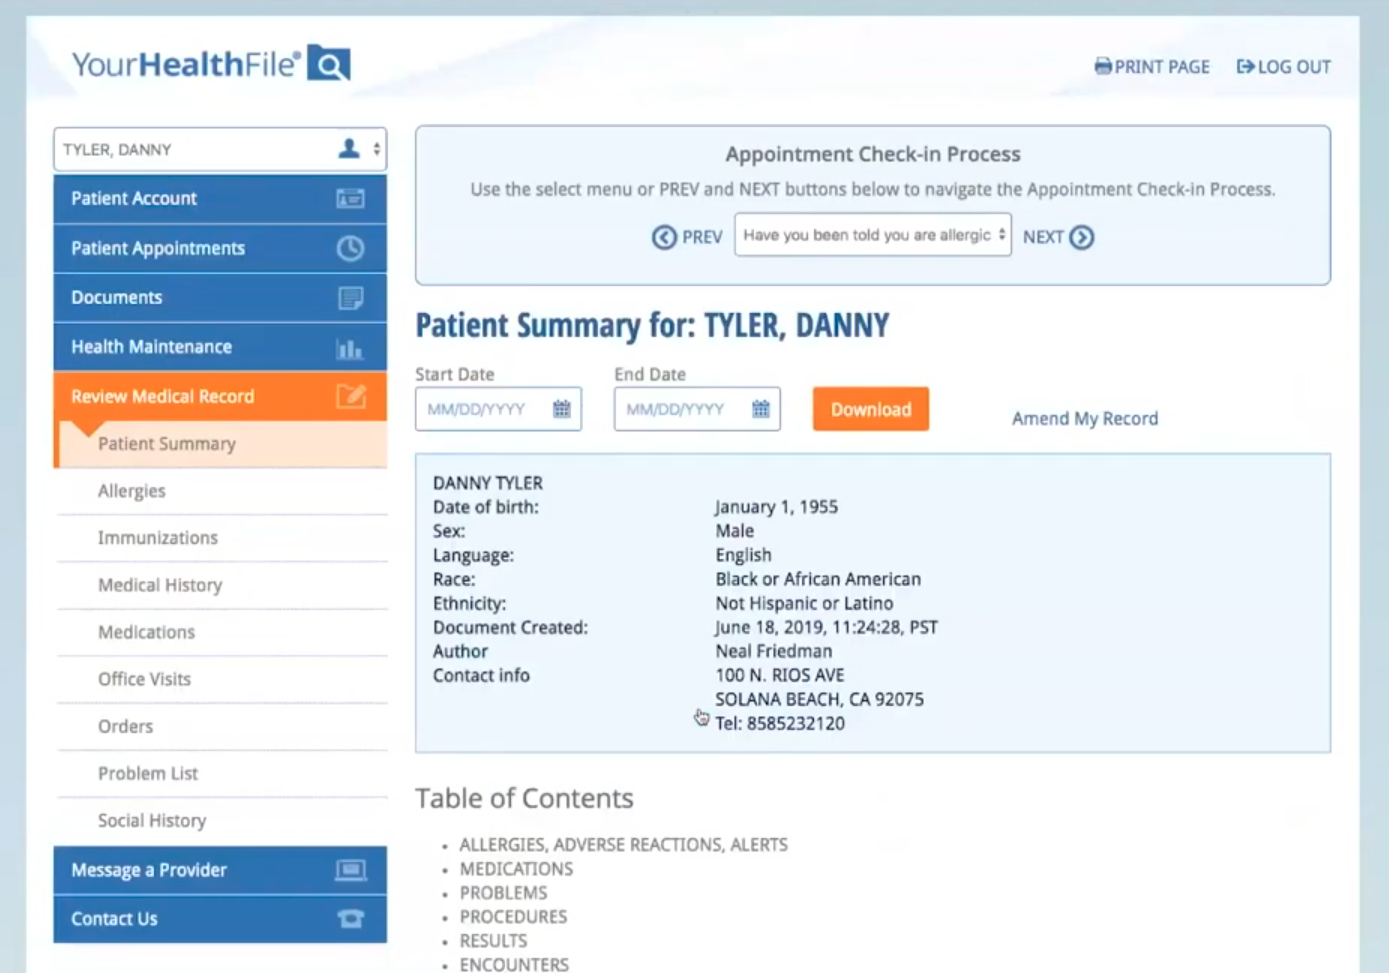 Patient summaries that are uploaded into NextGen can be shared with other provider locations